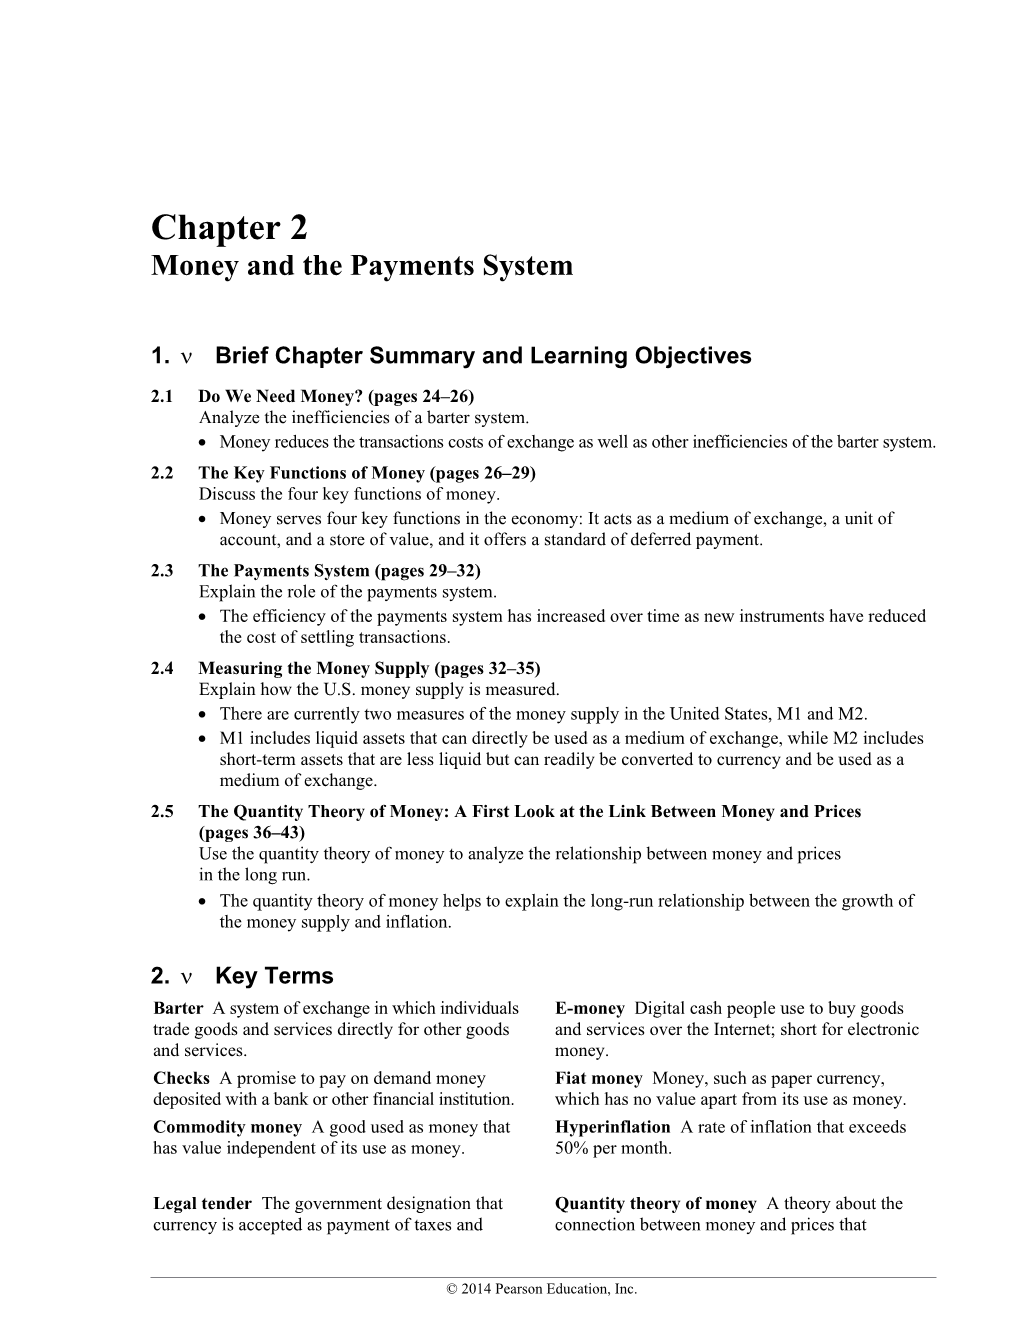 Chapter 2 Money and the Payments System 21